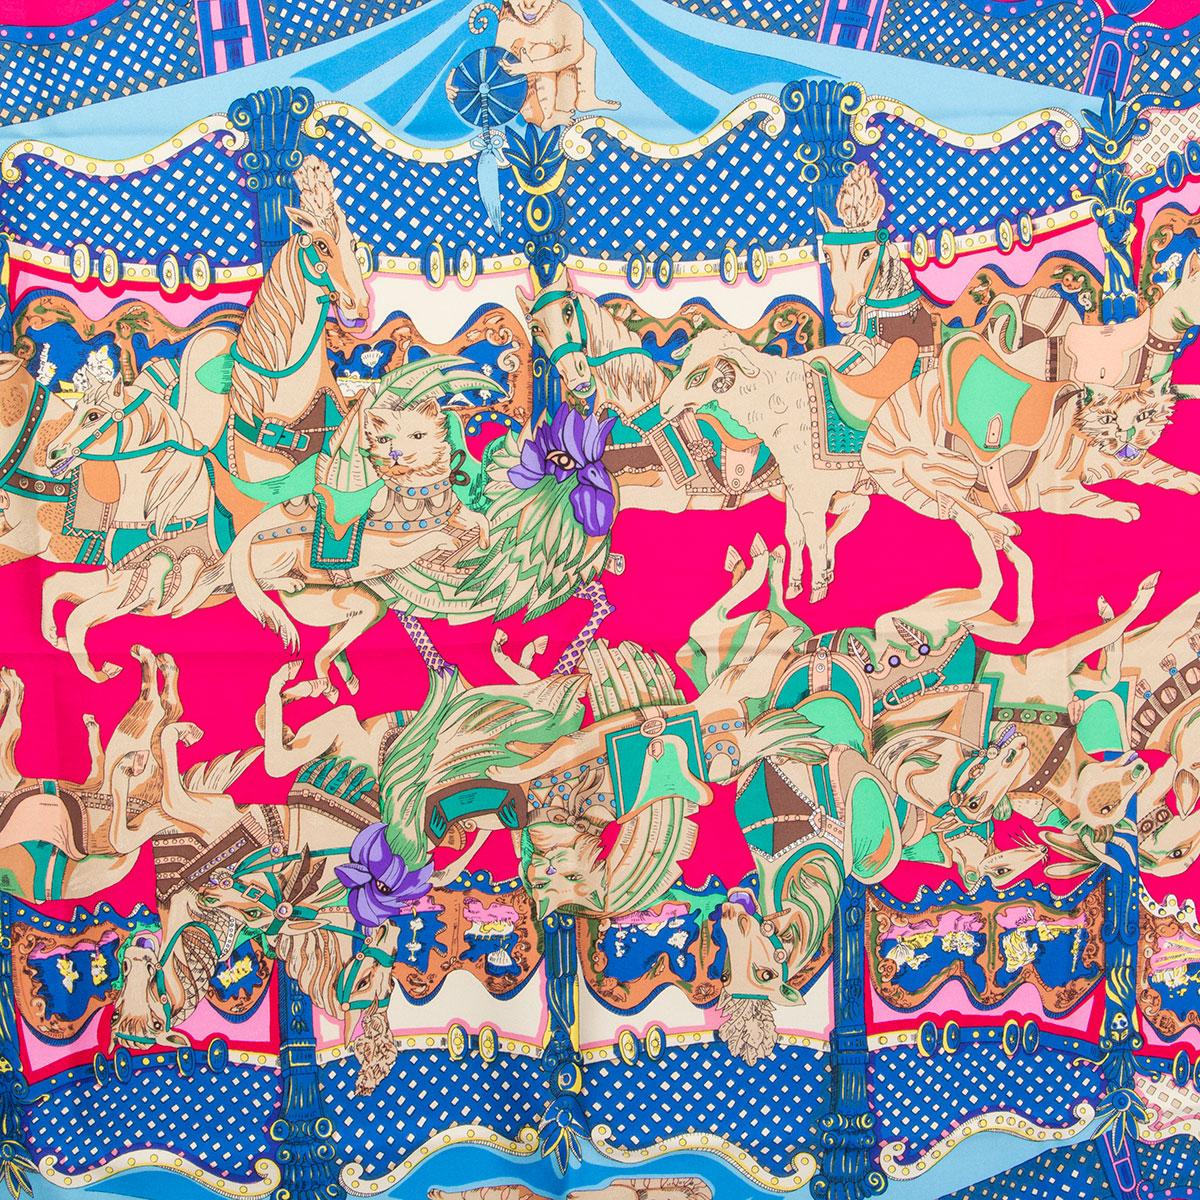 100% authentic Hermes 'Tournez Manege 90' scarf by Annie Faivre in black silk twill (100%) with pink center and details in blue, green and beige. Has been worn and is in excellent condition.

Width 90cm (35.1in)
Height 90cm (35.1in)

All our